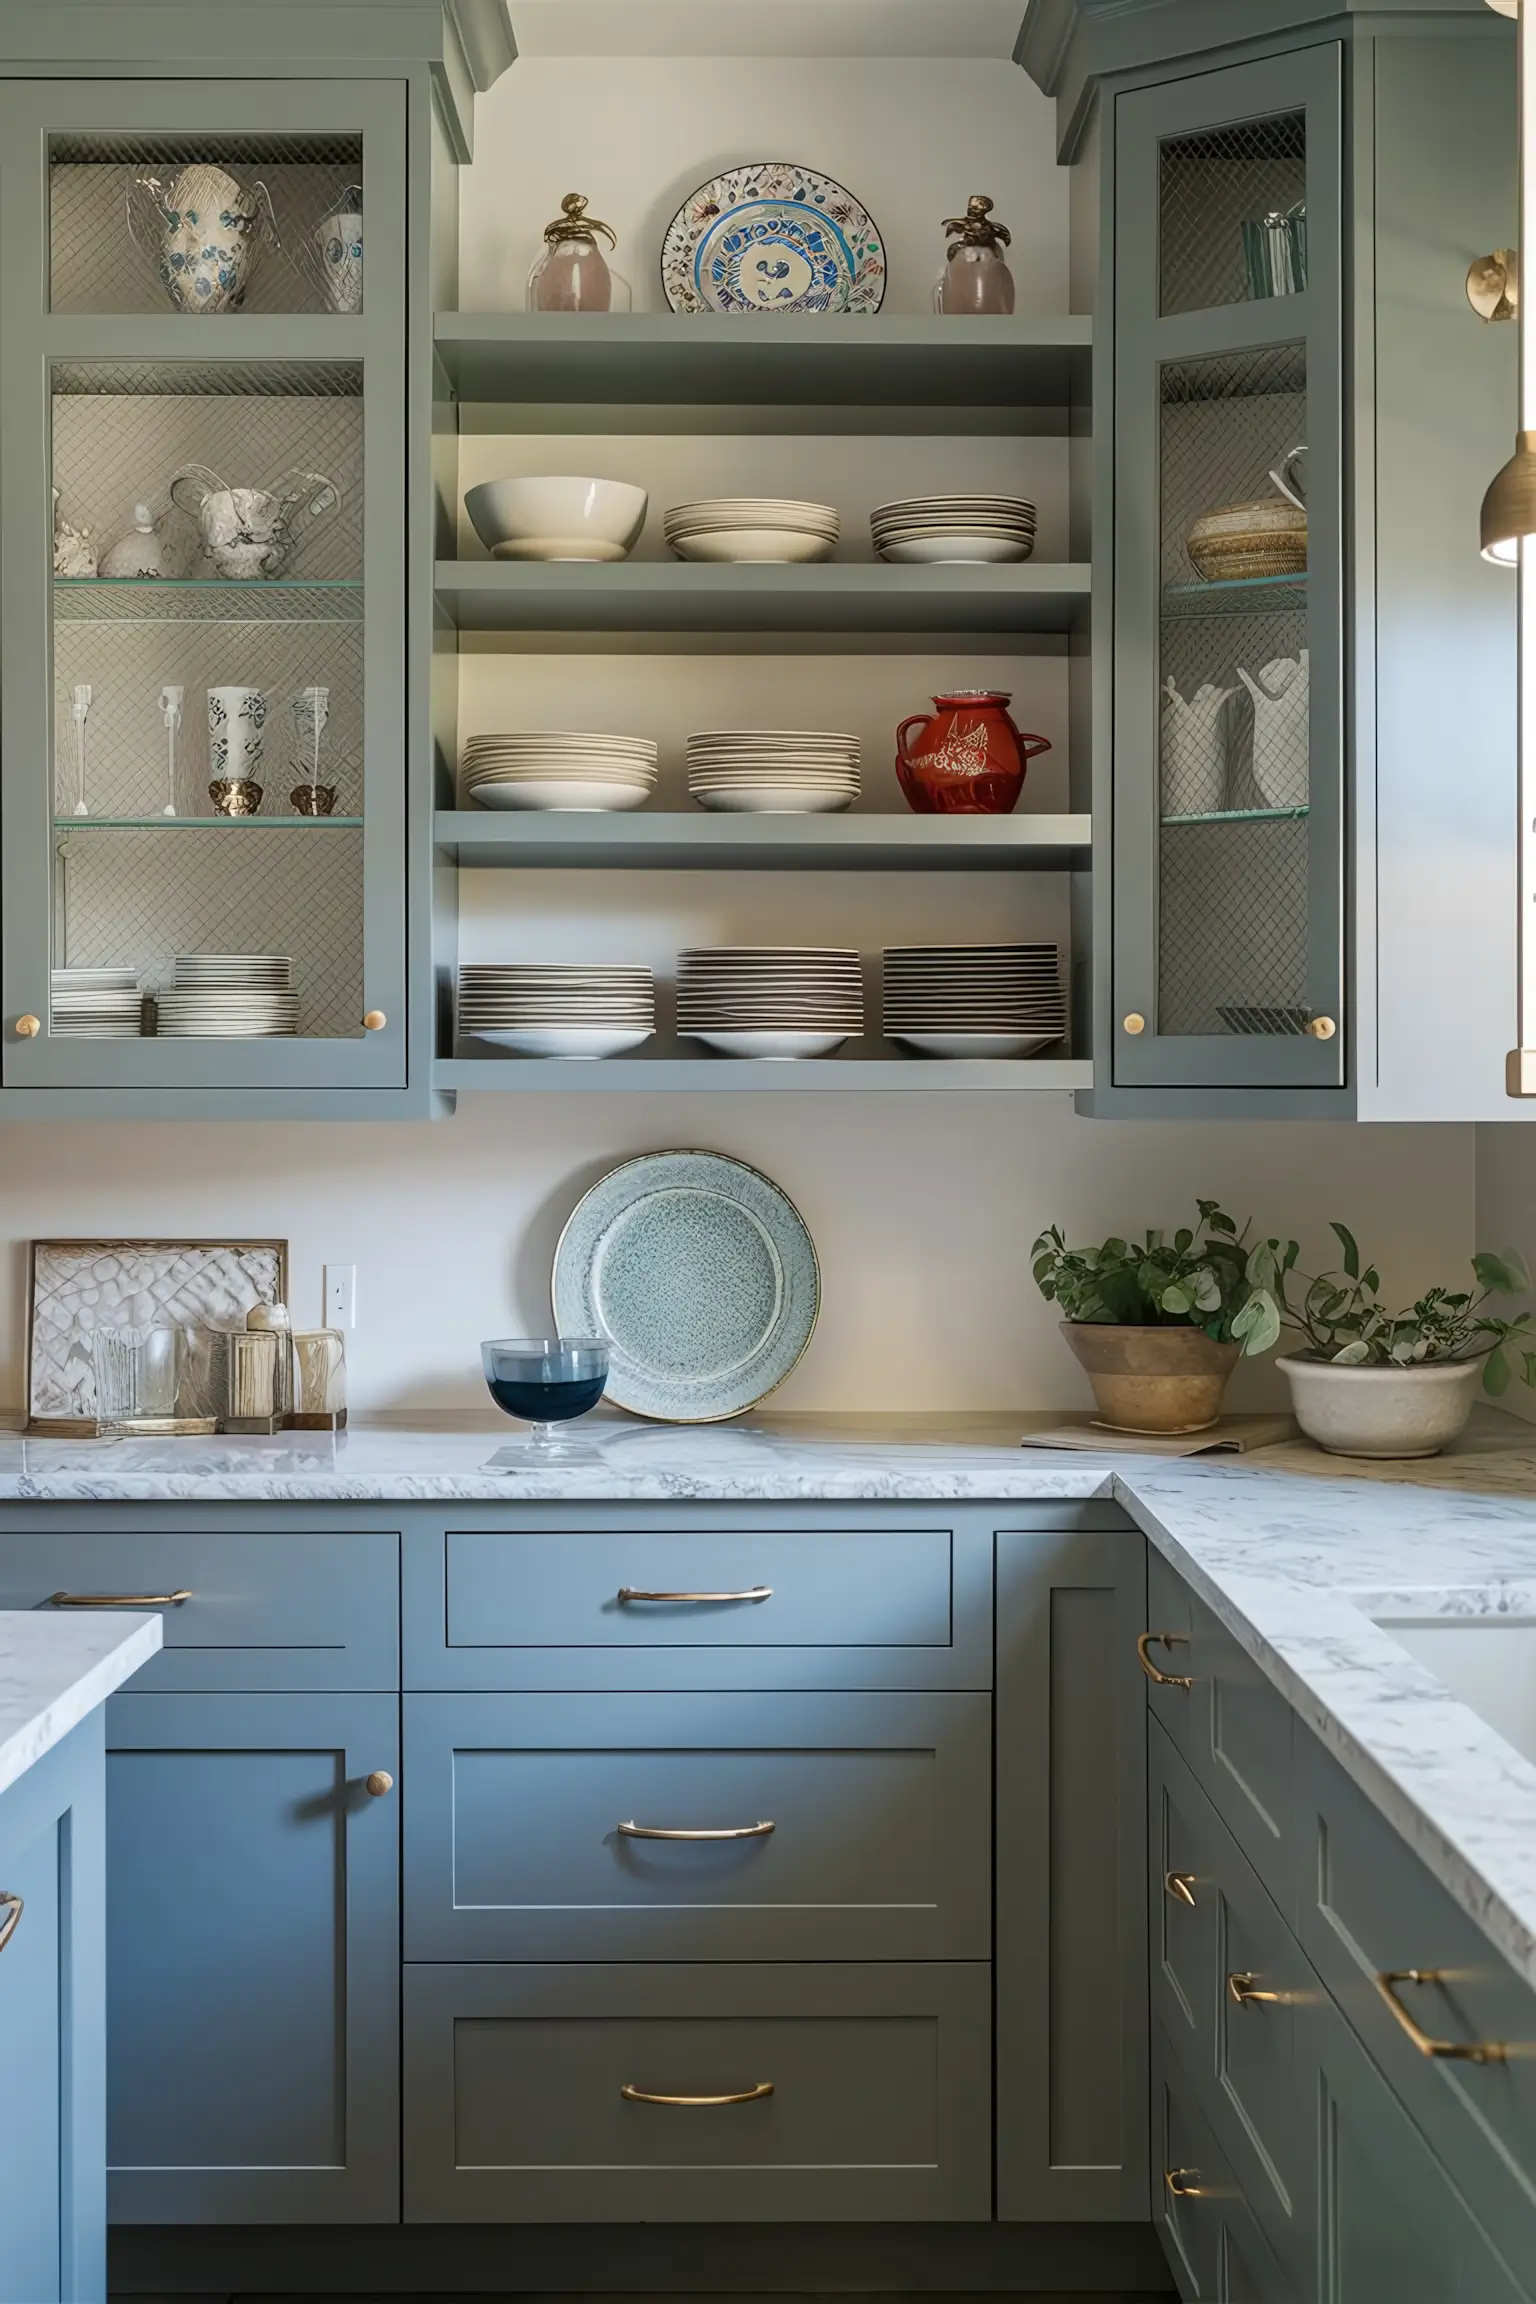 Budget-friendly kitchen remodel with repainted cabinets, open shelving, and updated hardware.